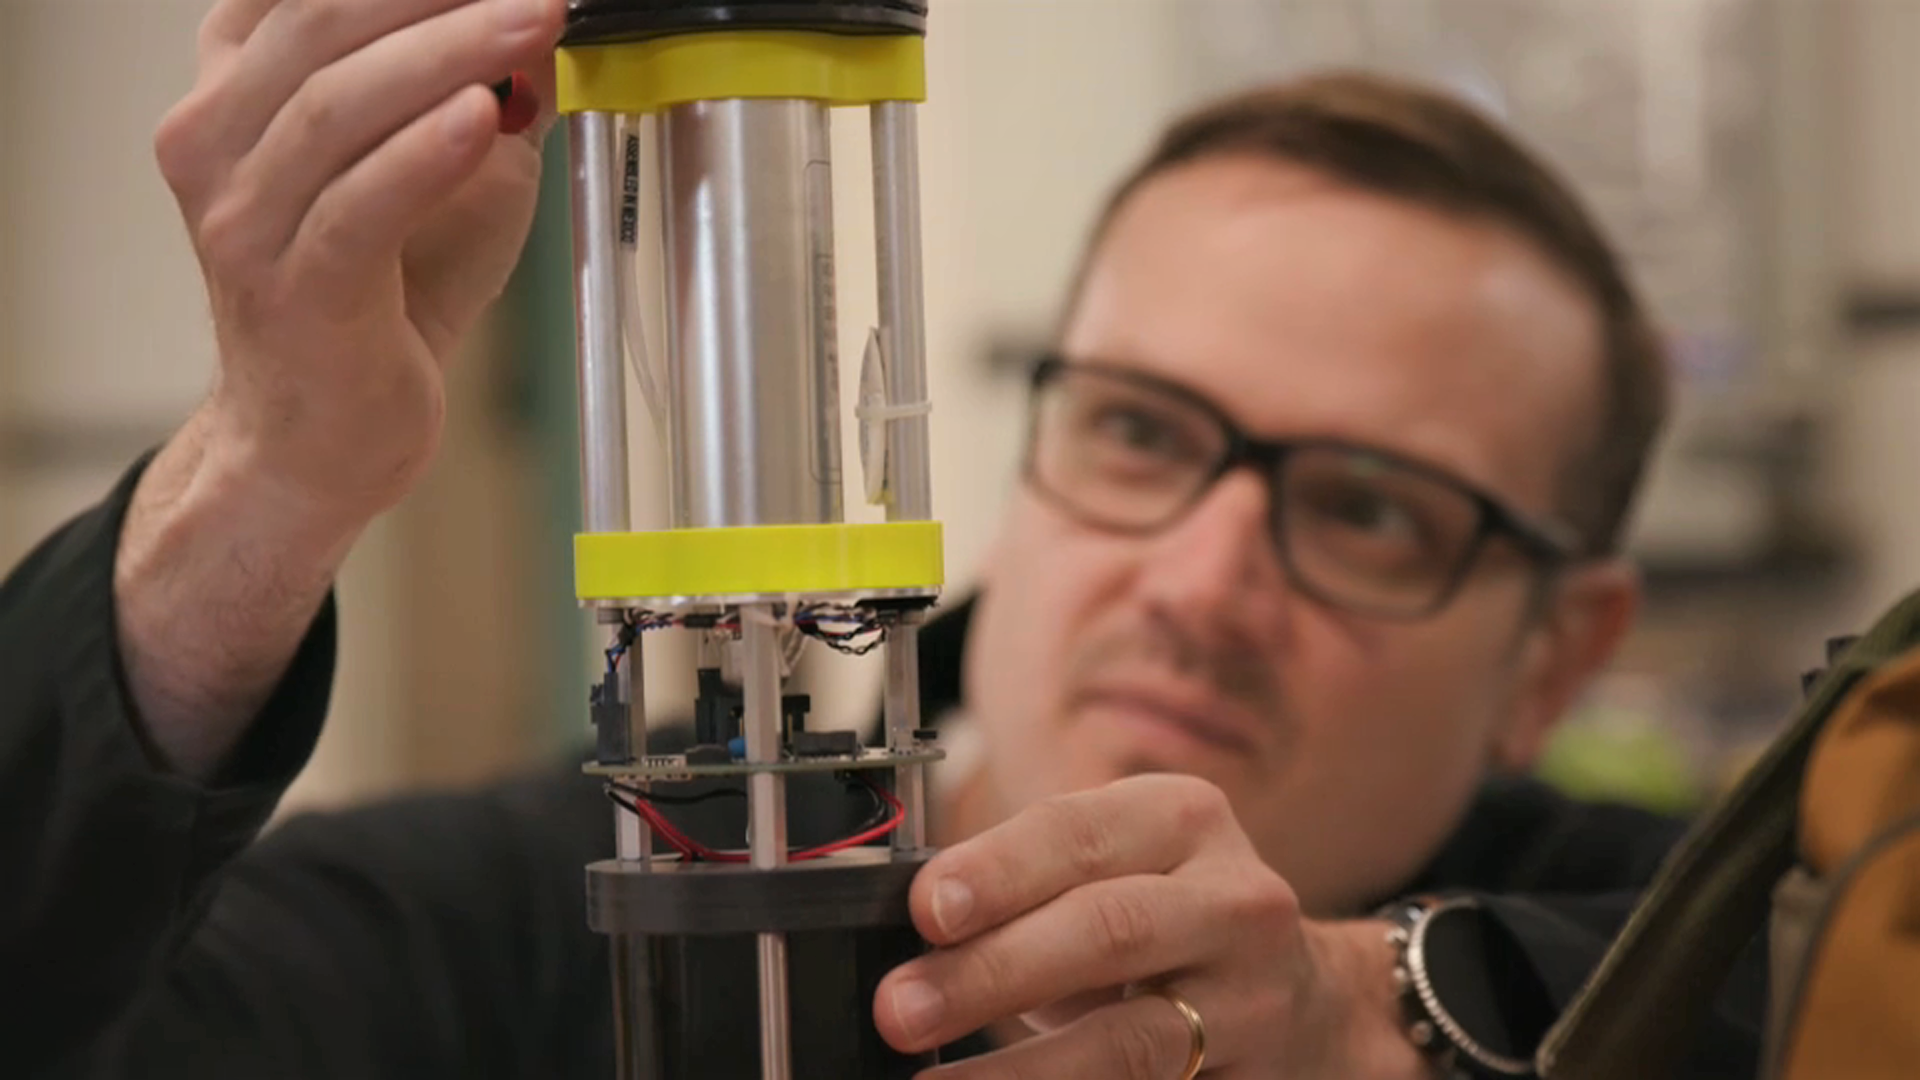 a man in glasses in the background operating a tube shapes device that collects pressure data